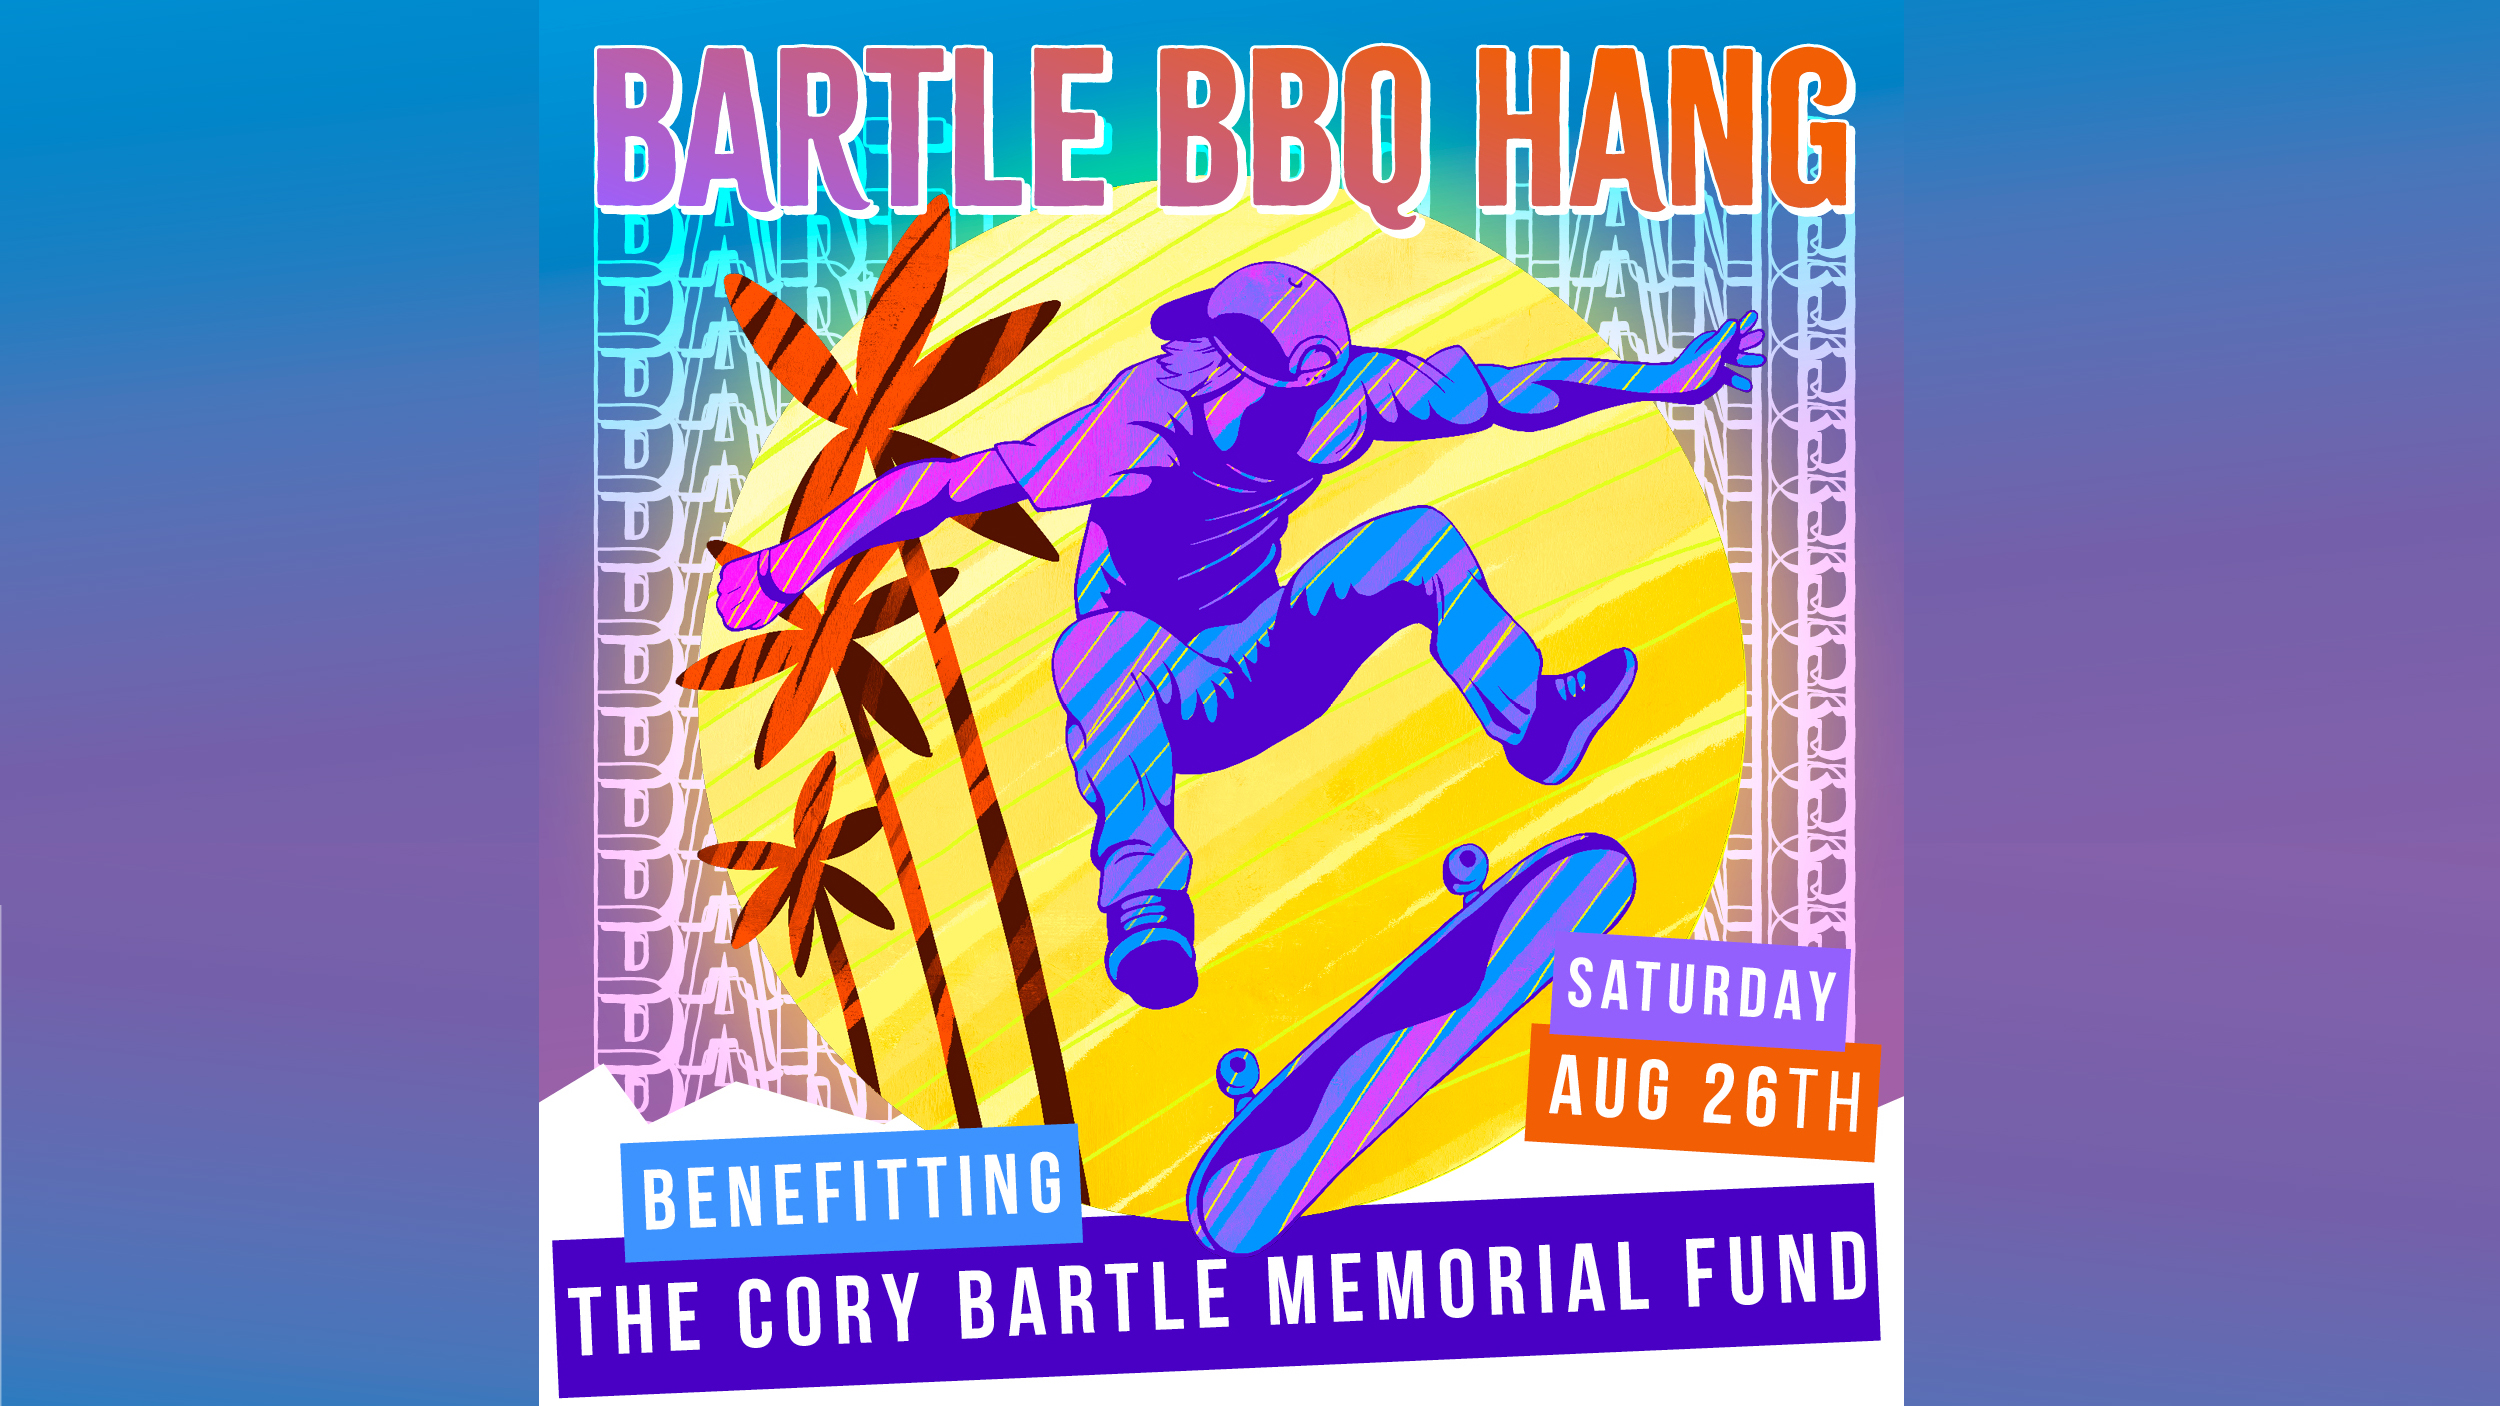 The Cory Bartle Memorial Fund with Inaugural ‘Bartle BBQ Hang’ Skateboarding Event